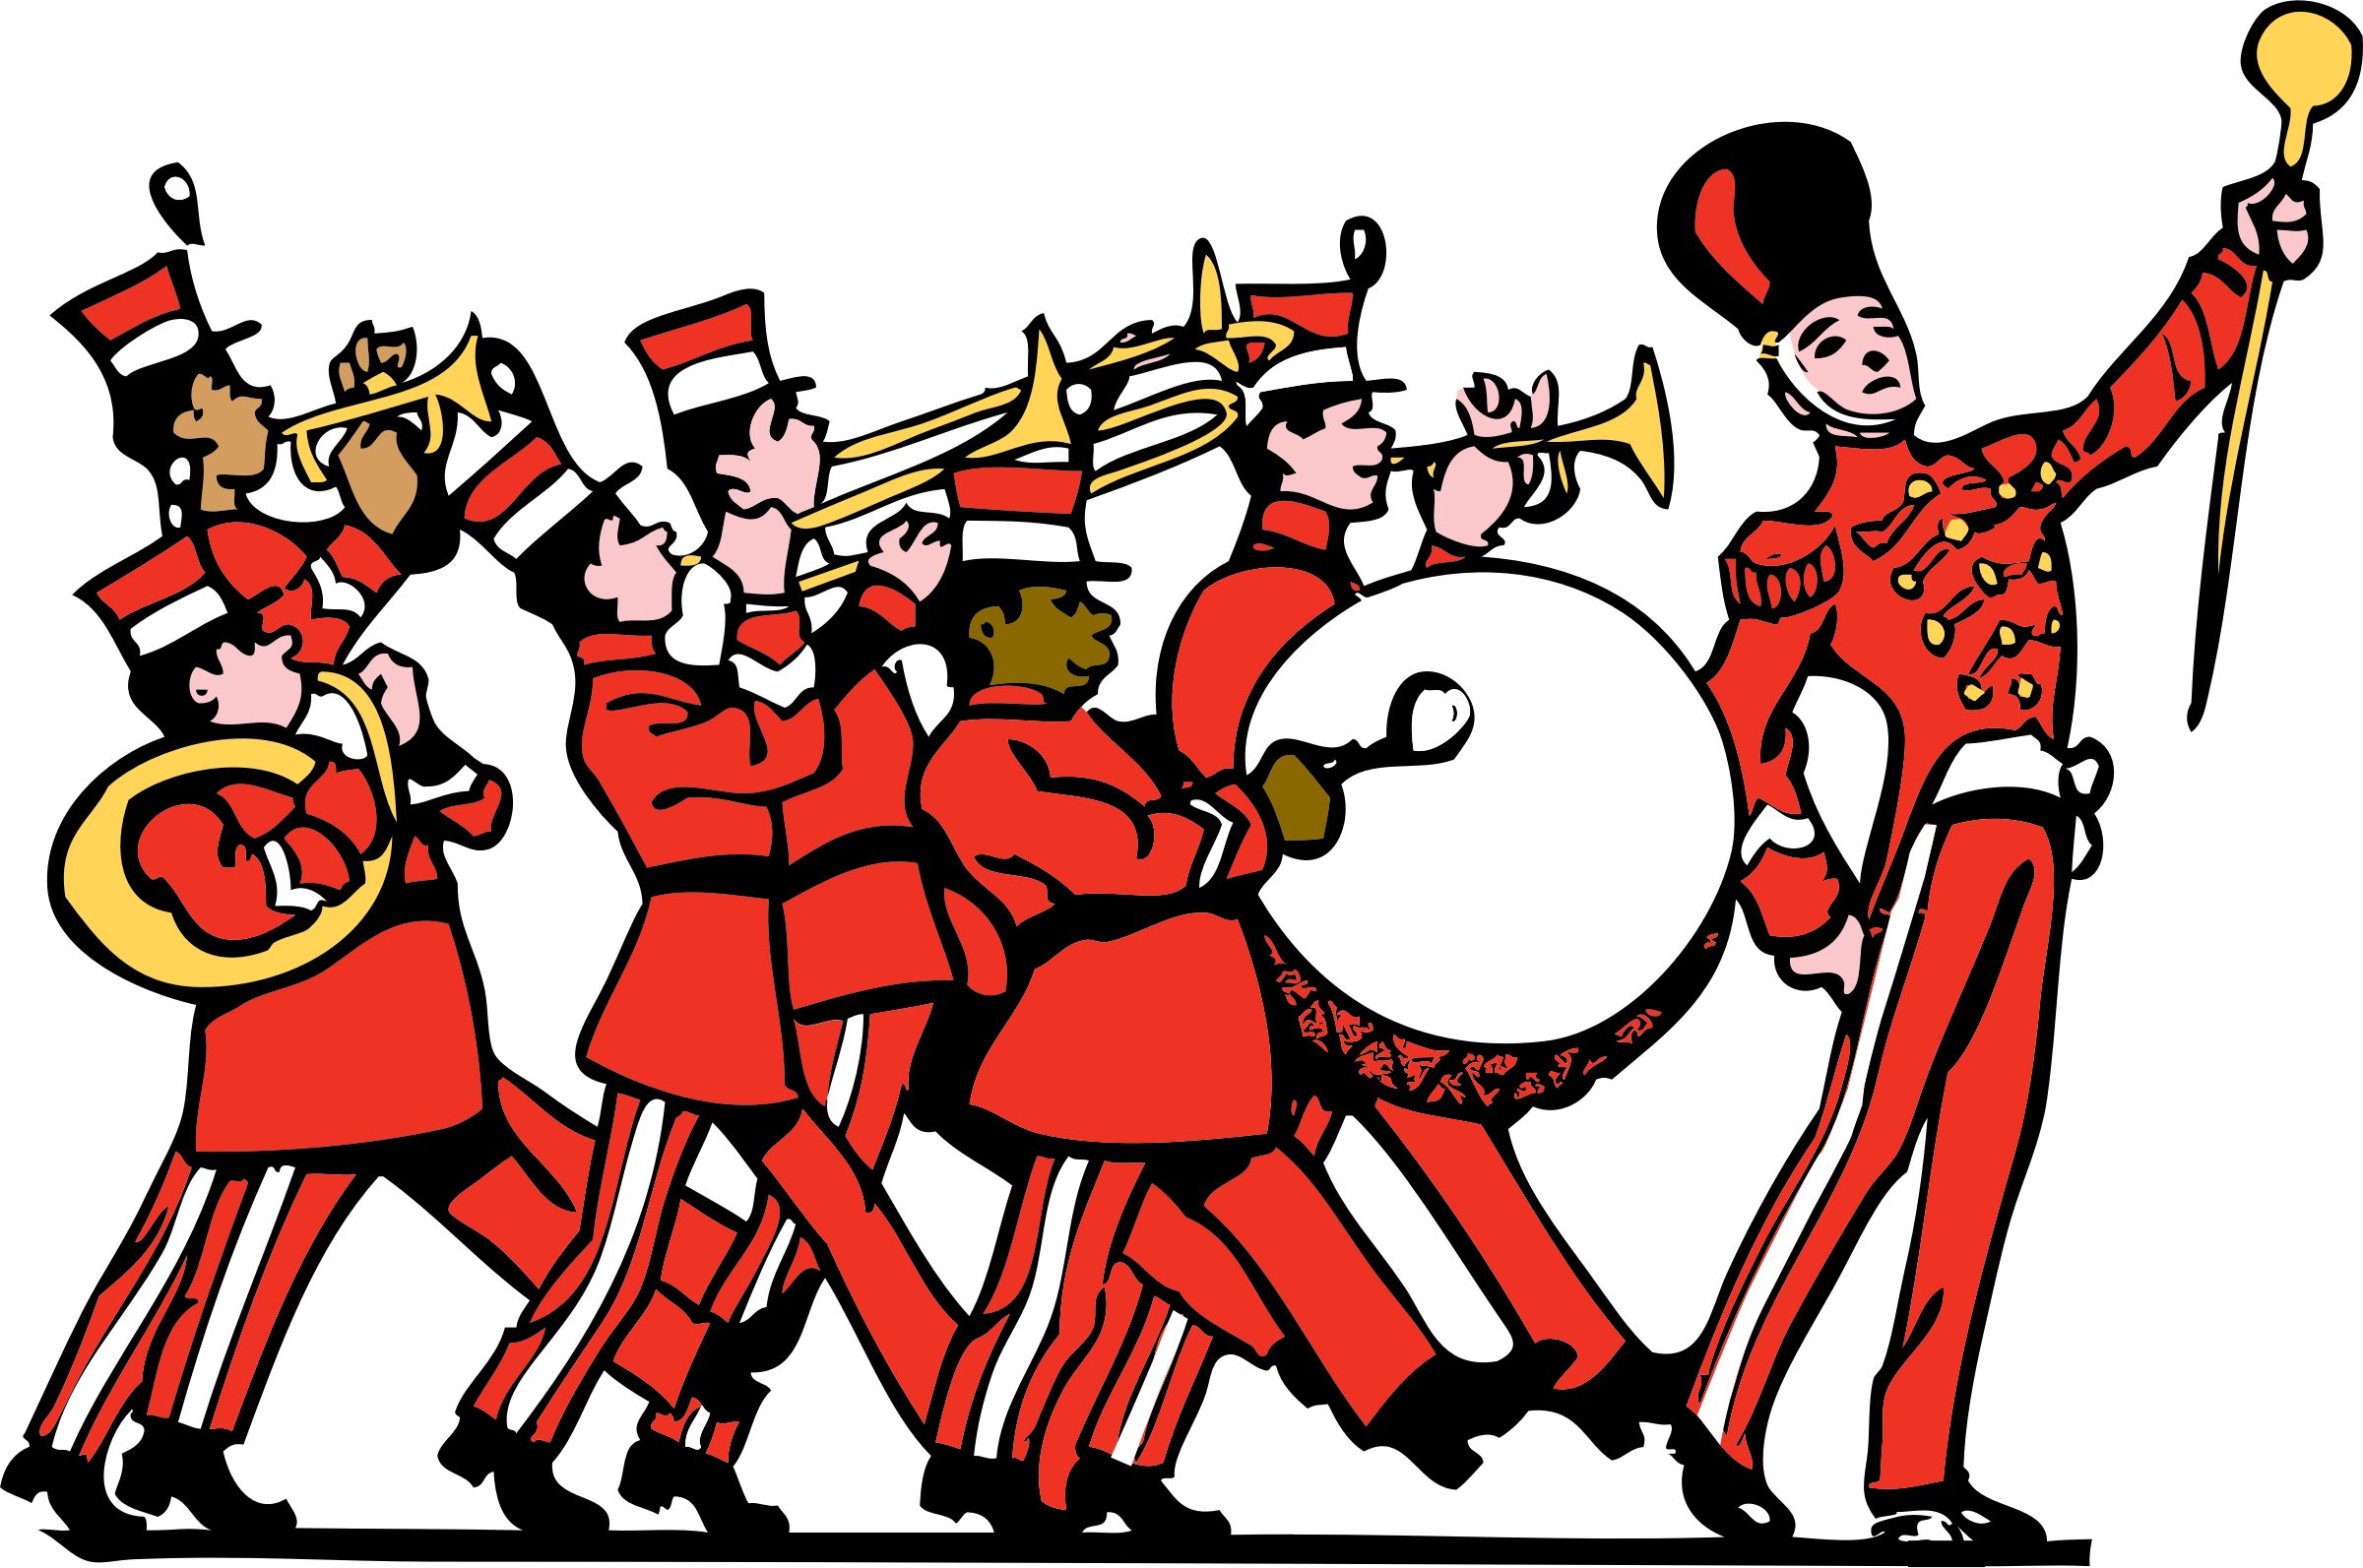 Drum Clipart Marching Band Drum Drum Marching Band Drum Transparent